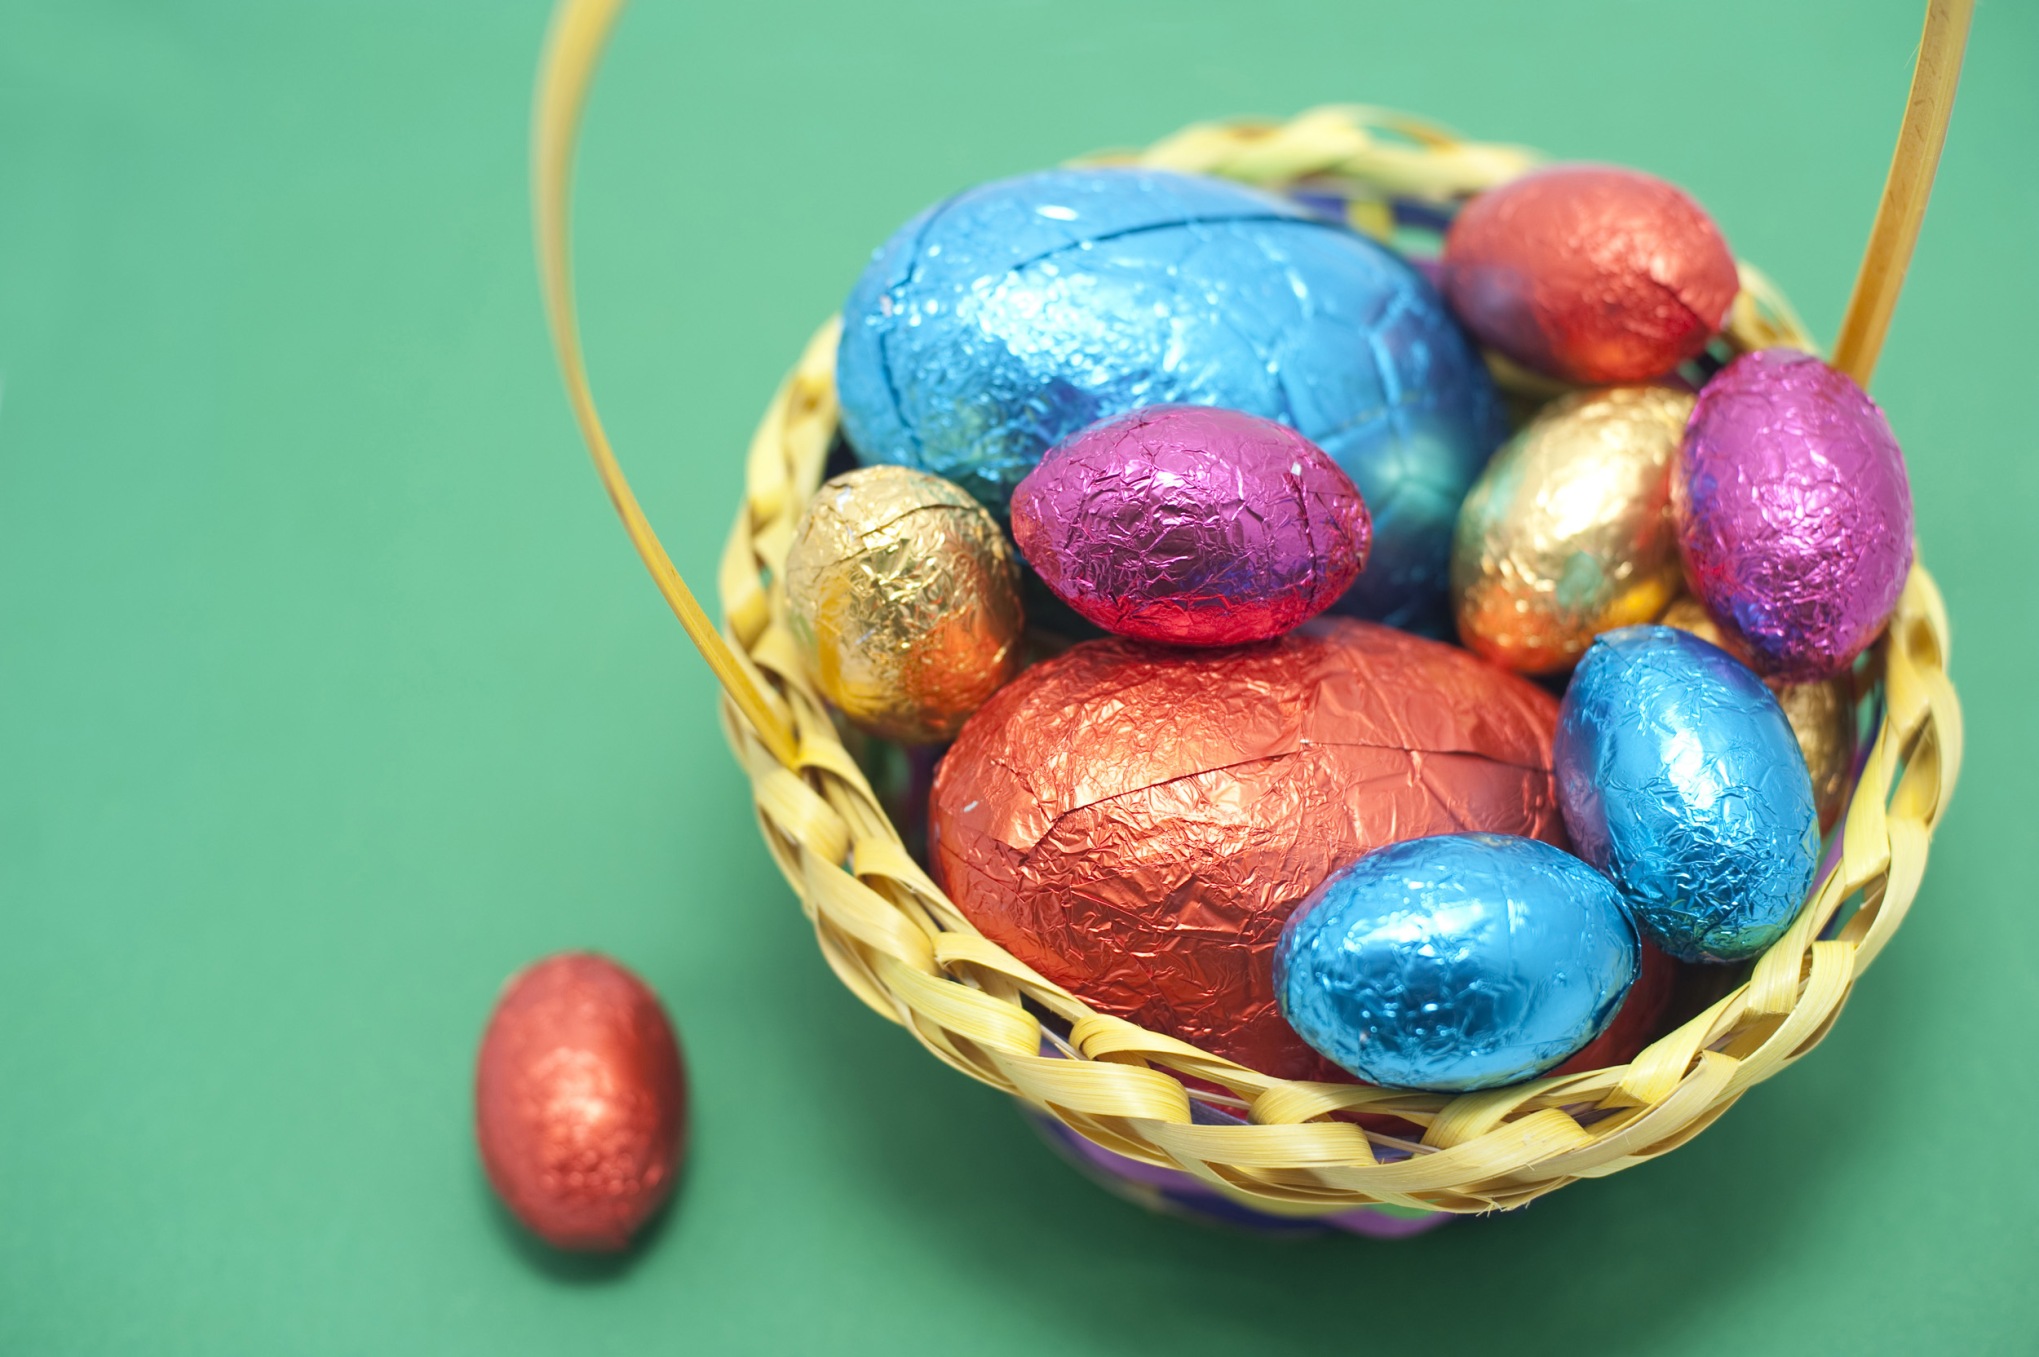 How To Avoid Over-Indulging On Chocolate This Easter.